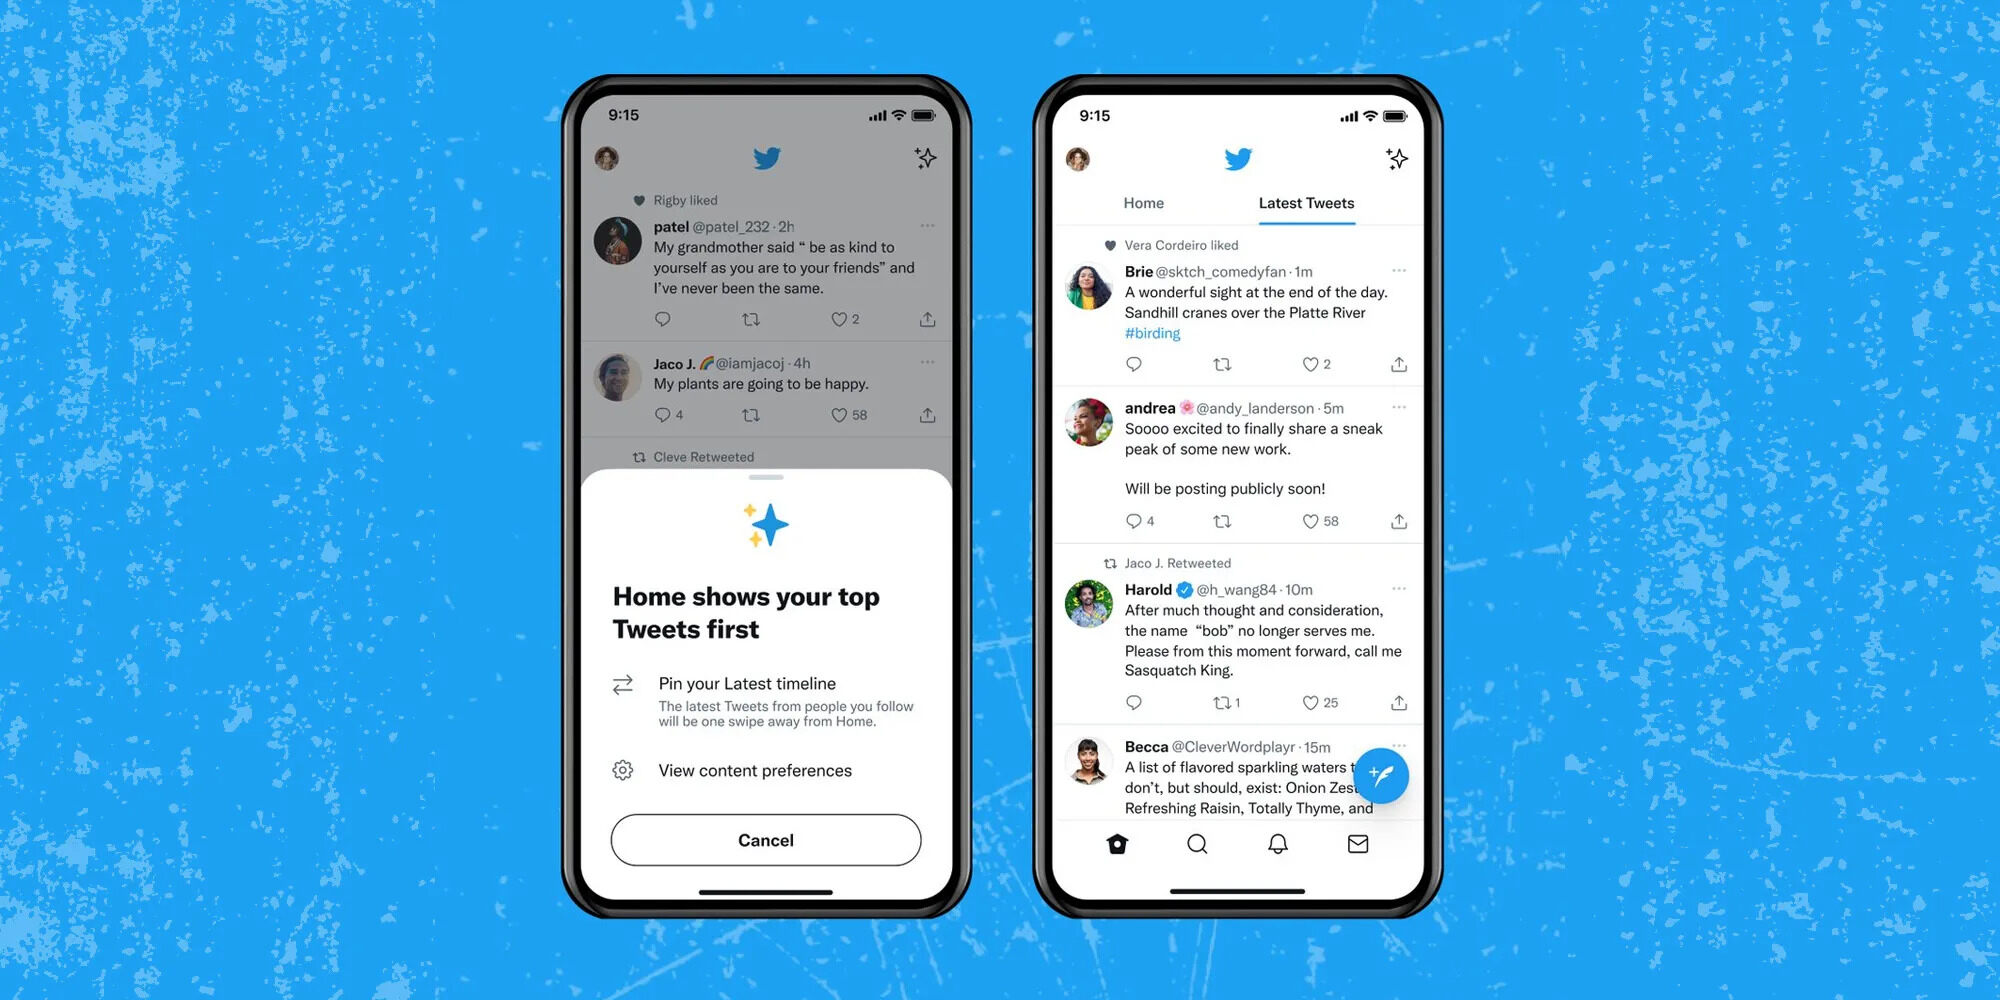 twitter-removes-tabbed-timeline-after-complaints-from-users